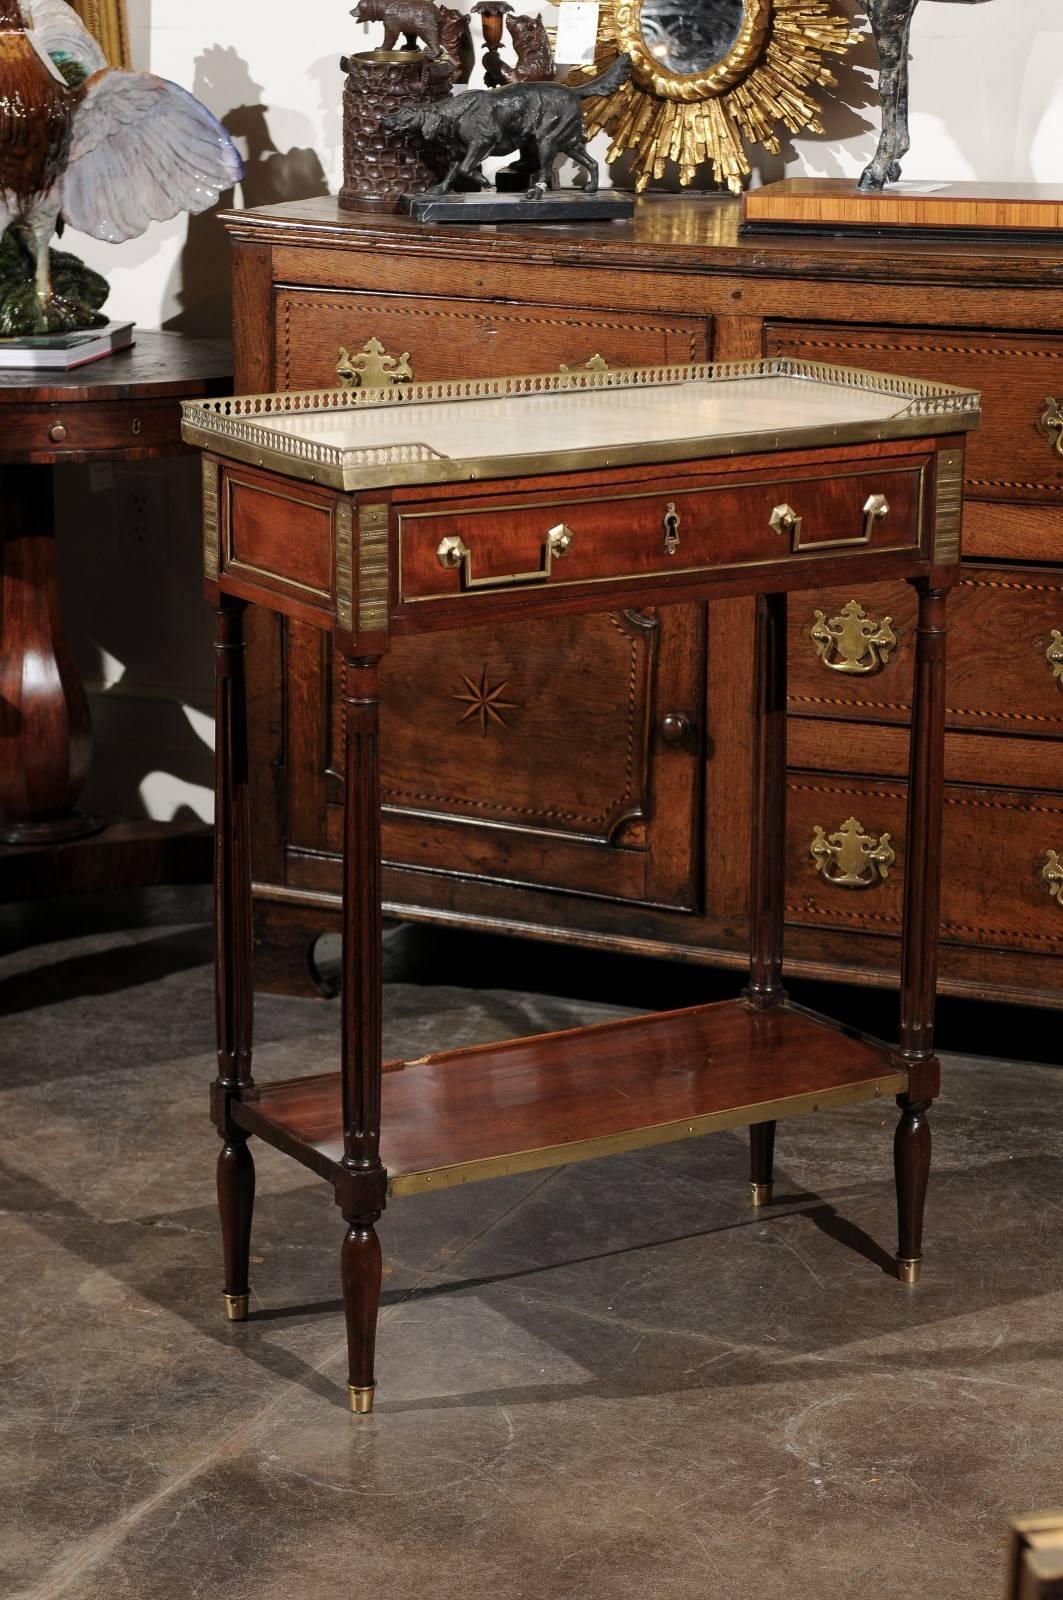 This elegant English Regency period console side table from the early 19th century features a rectangular white marble top surrounded by a delicate pierced brass gallery. The front is decorated with a single drawer with linear bail handles and